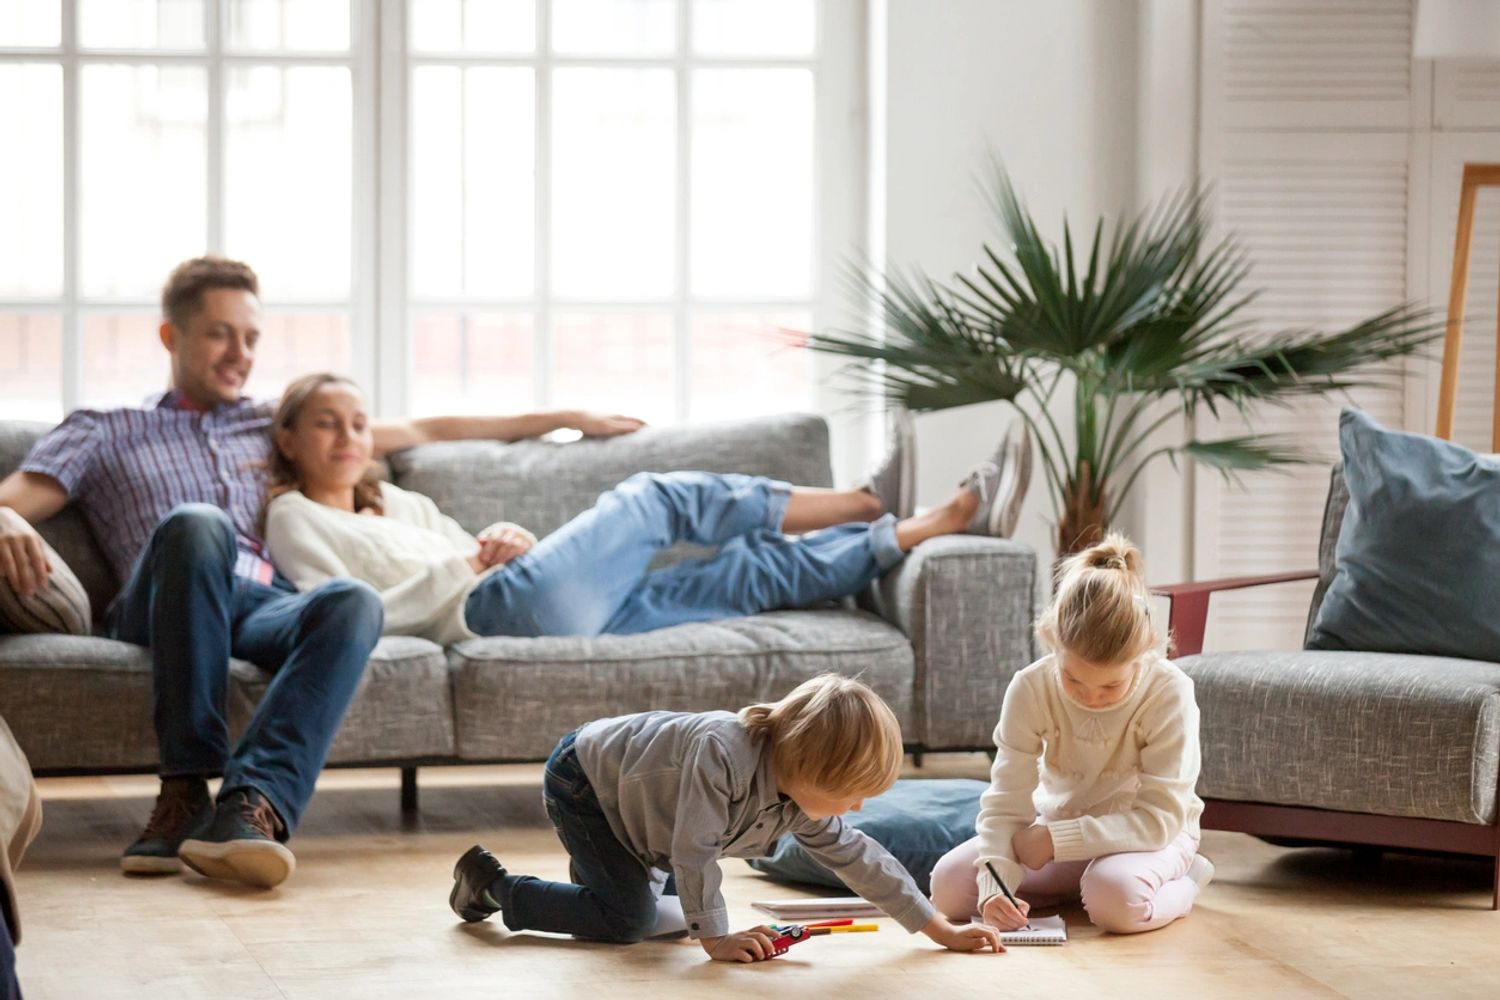 Family spending time together in living room.